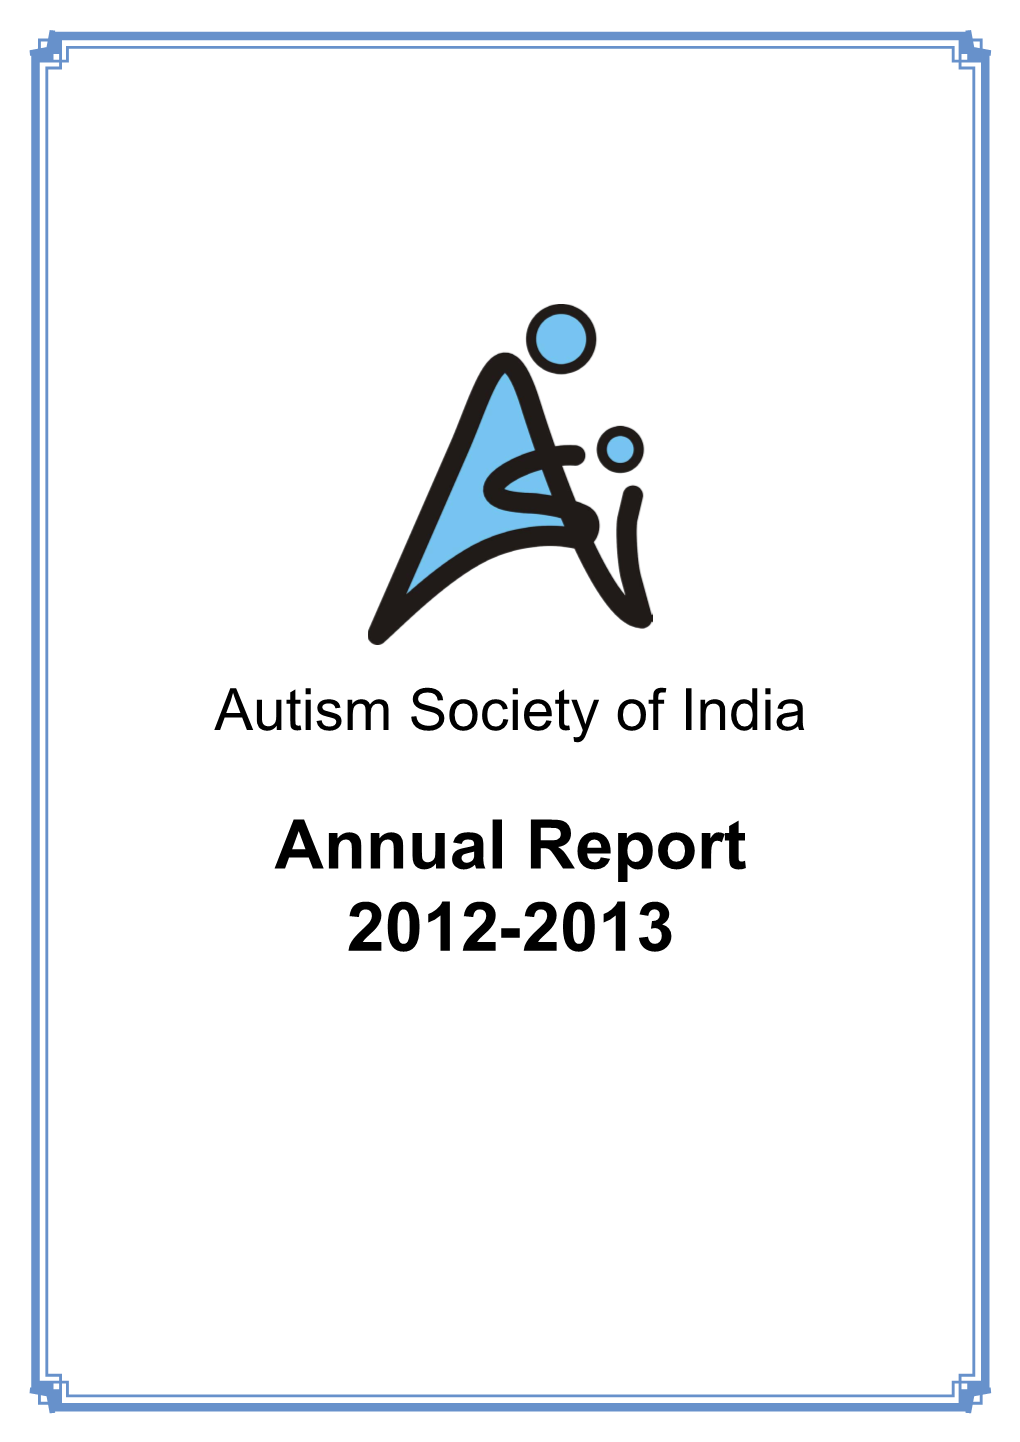 Annual Report 2012-2013 Message from Prof